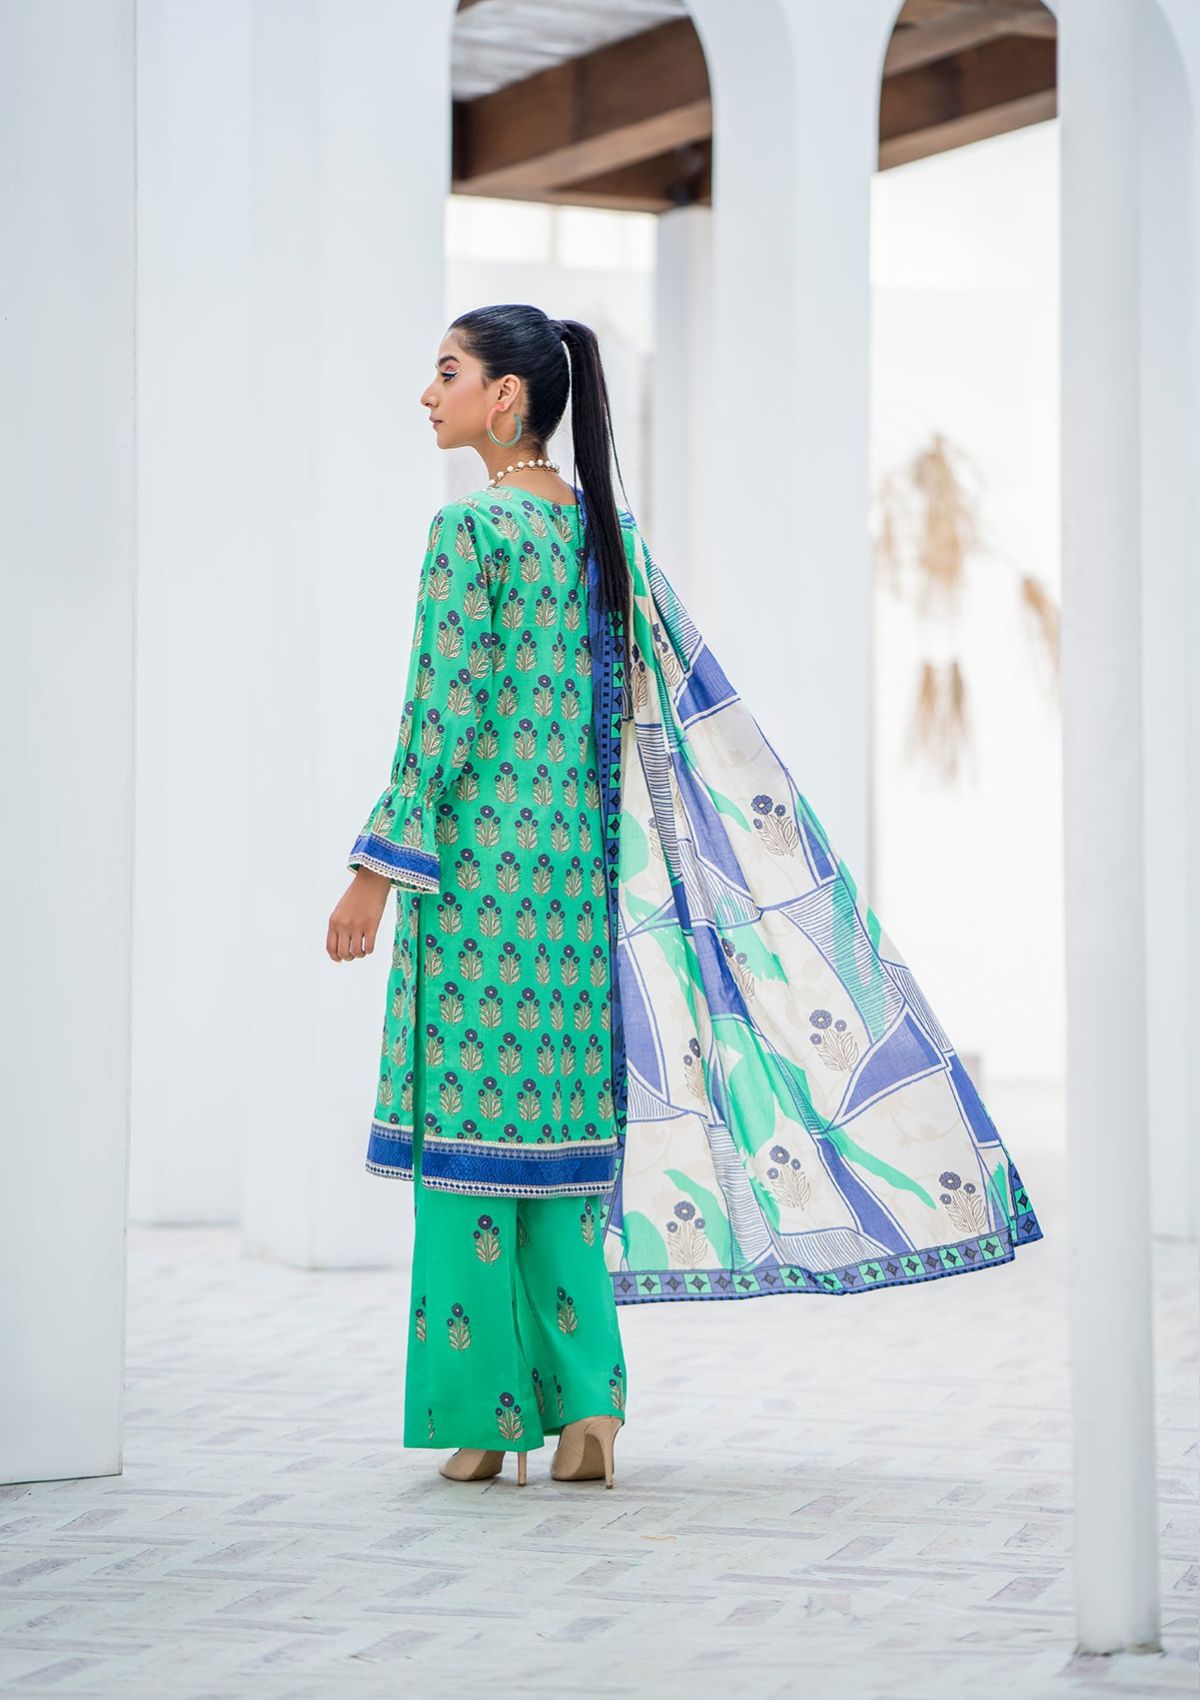 Lawn Collection - Paltar - Parvaaz - D/Printed - PF#42307